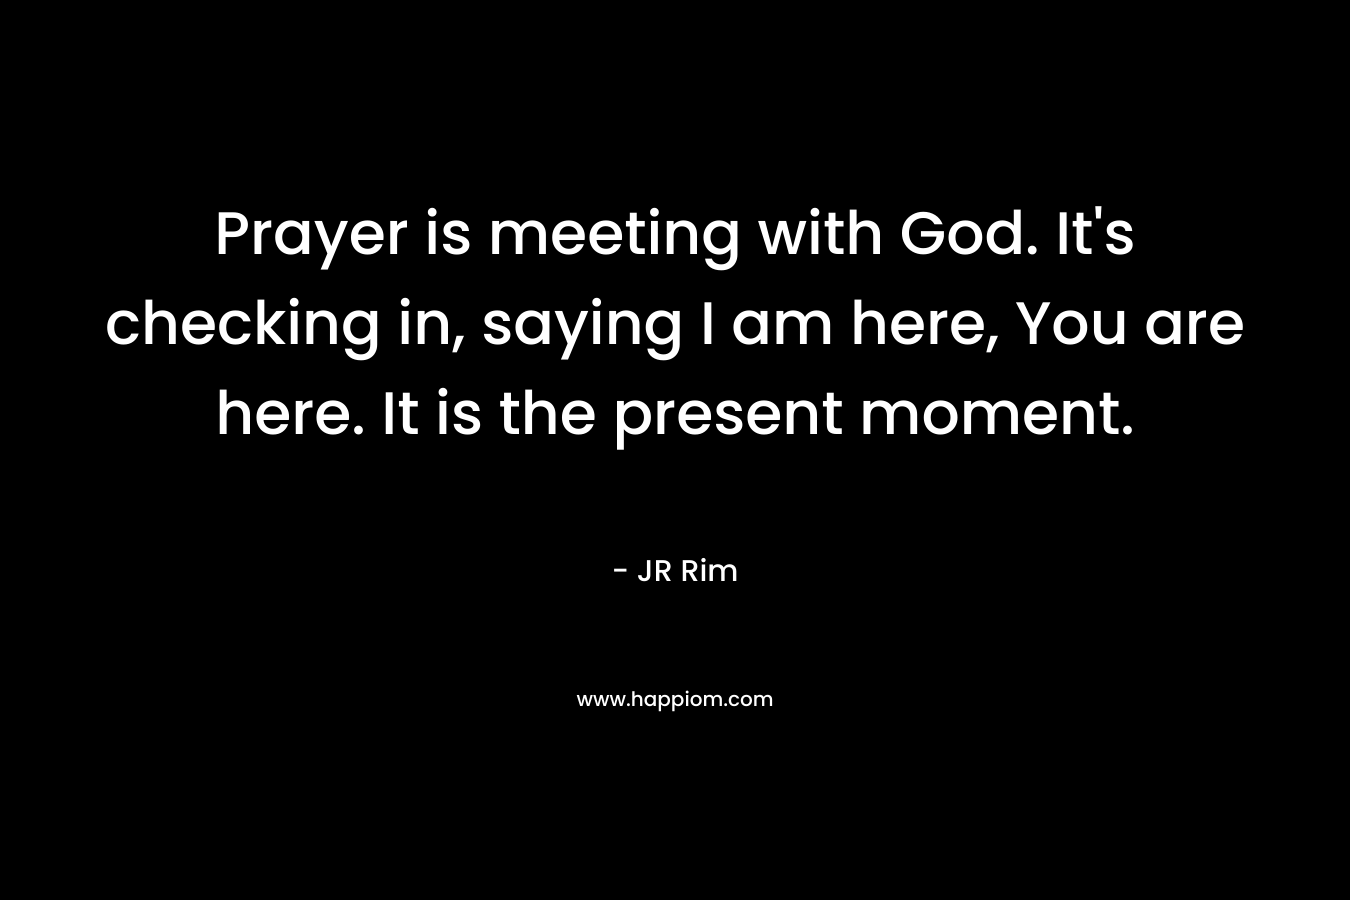 Prayer is meeting with God. It’s checking in, saying I am here, You are here. It is the present moment. – JR Rim